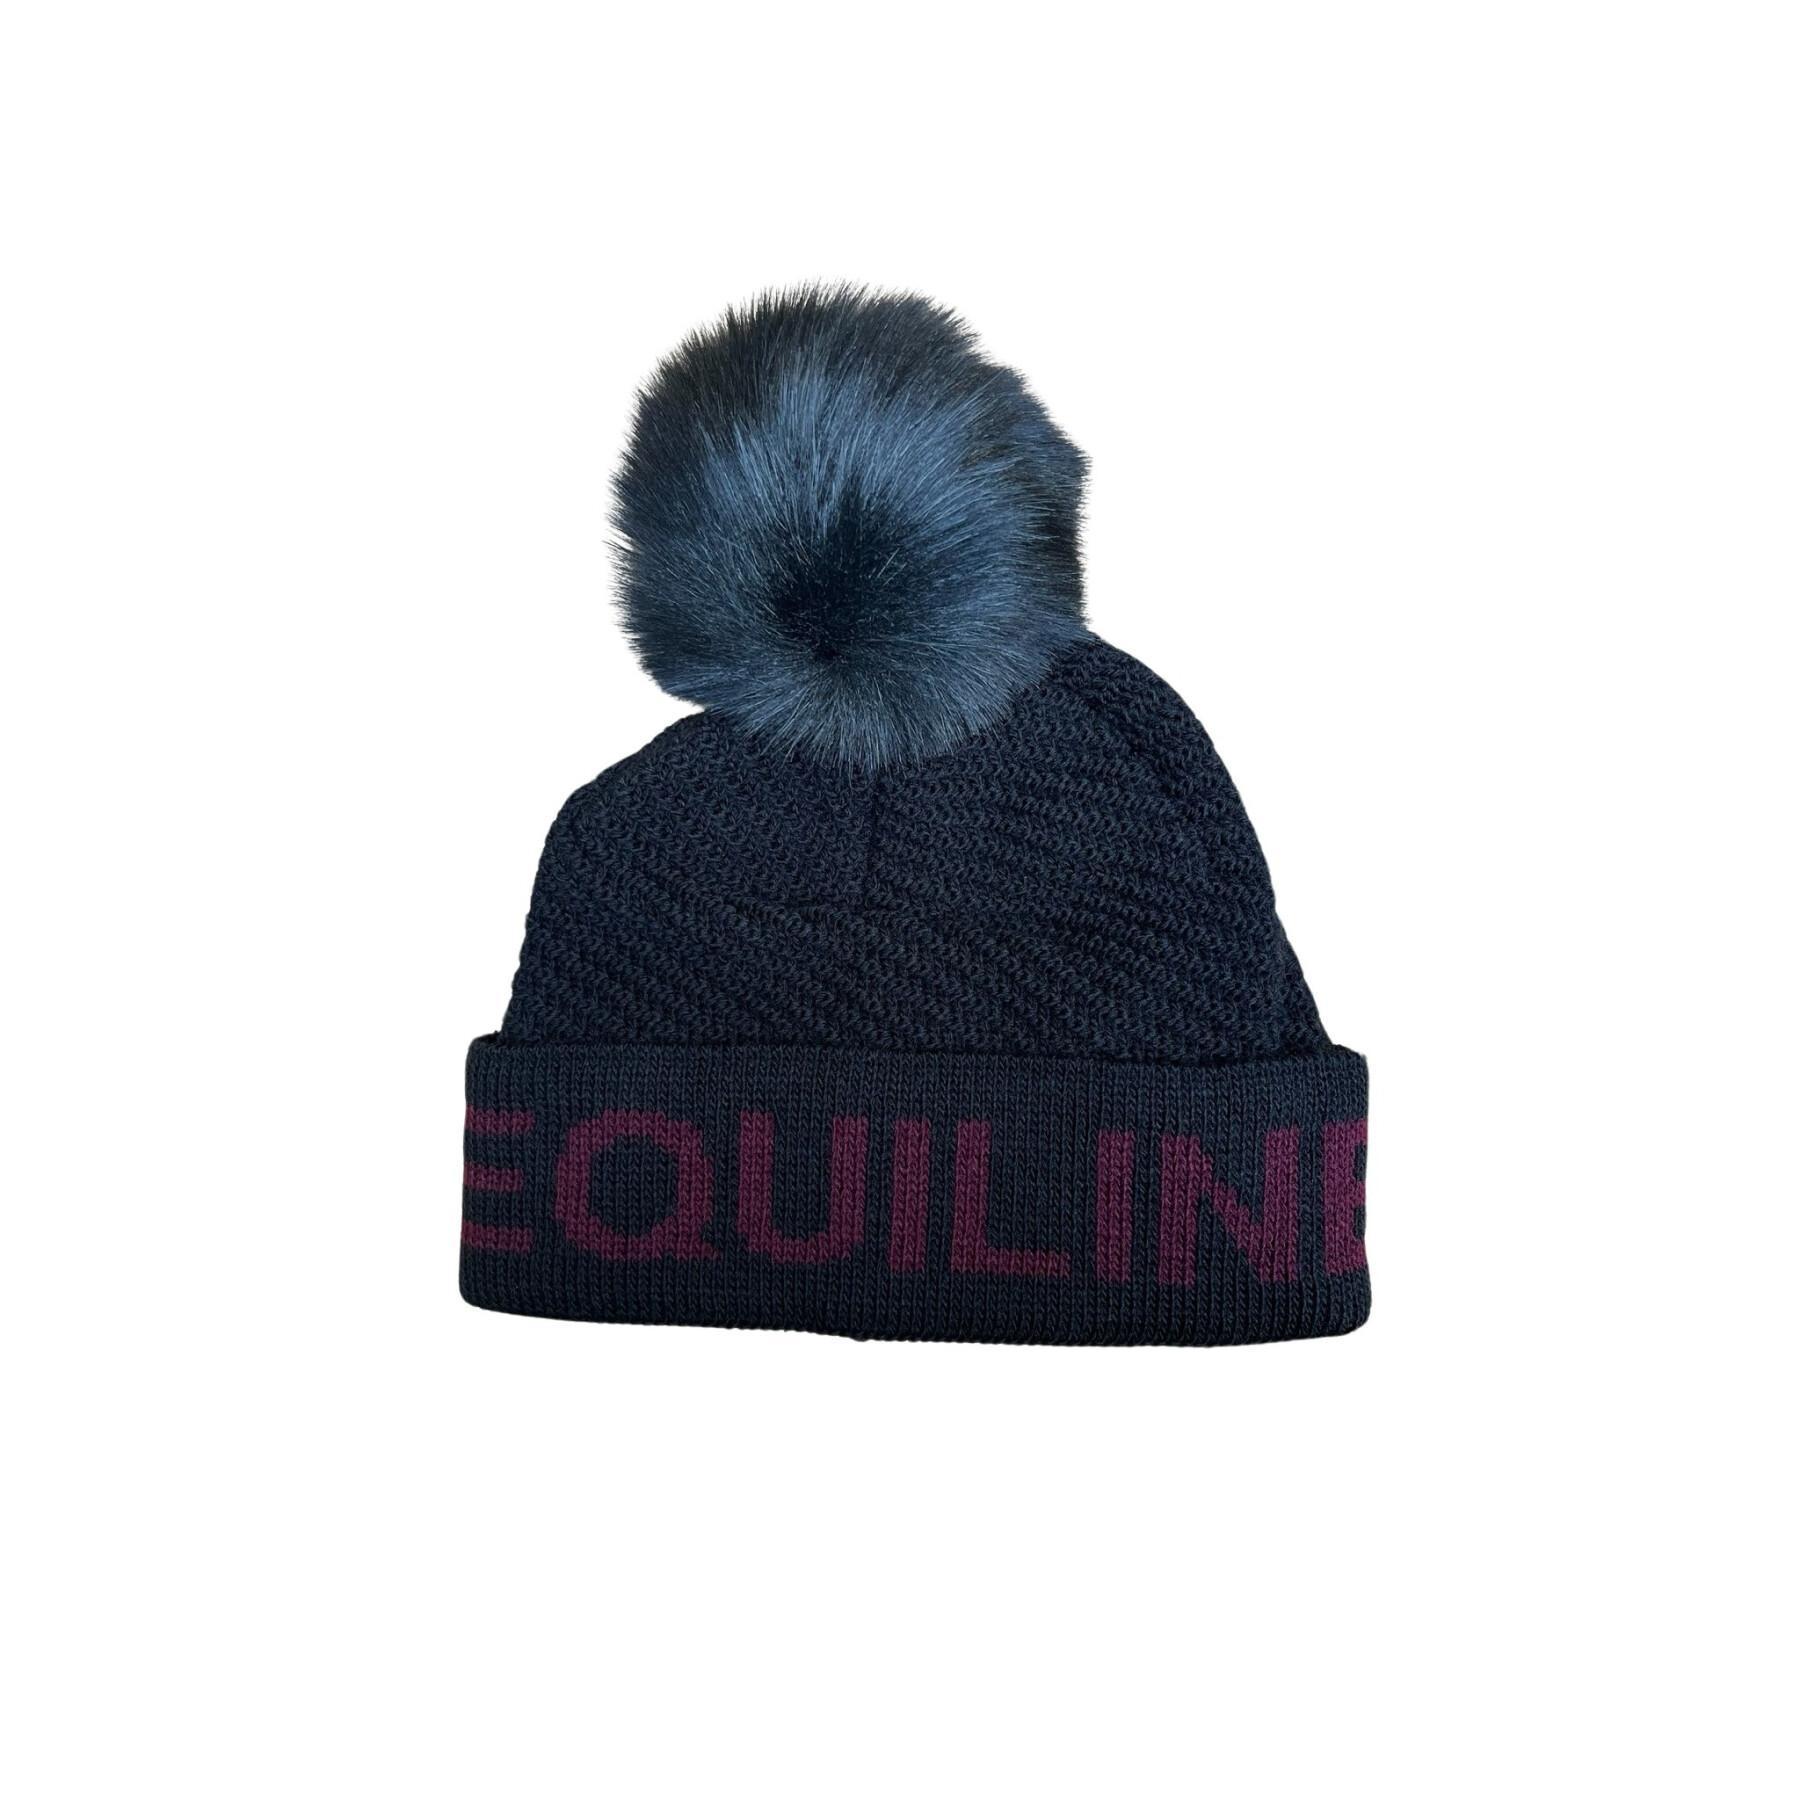 Knitted hat Equiline Claficp